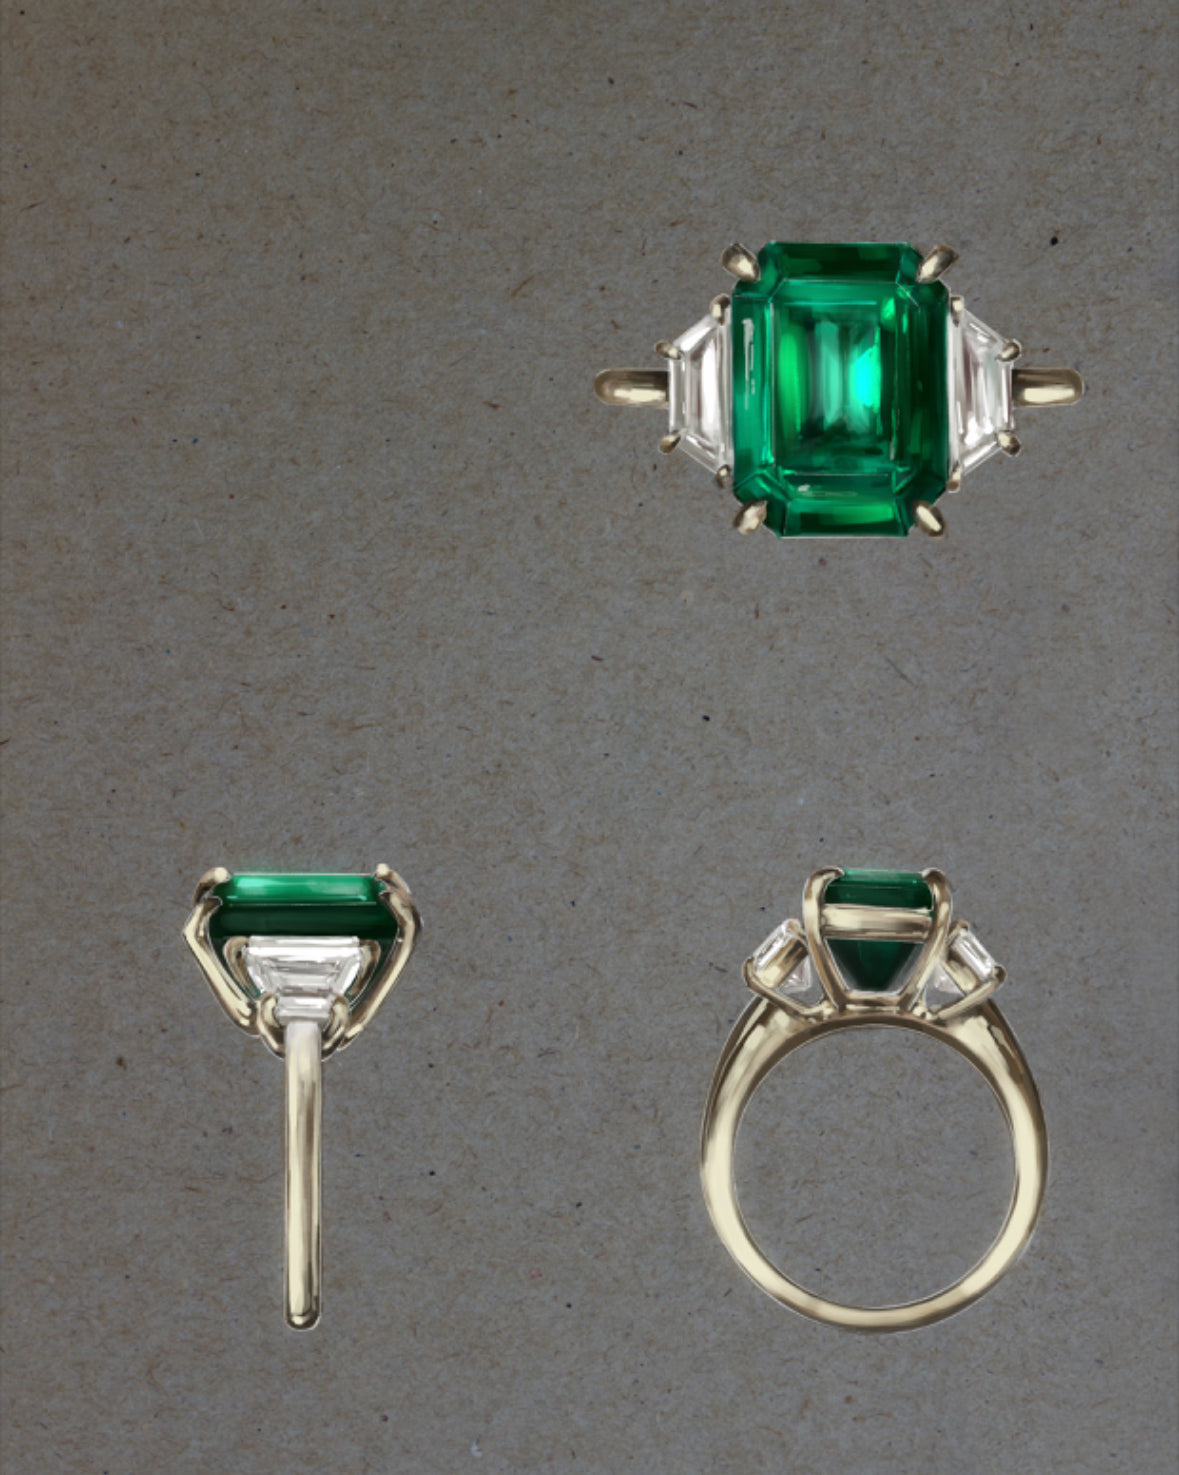 Emerald gold ring in various views on neutral background.